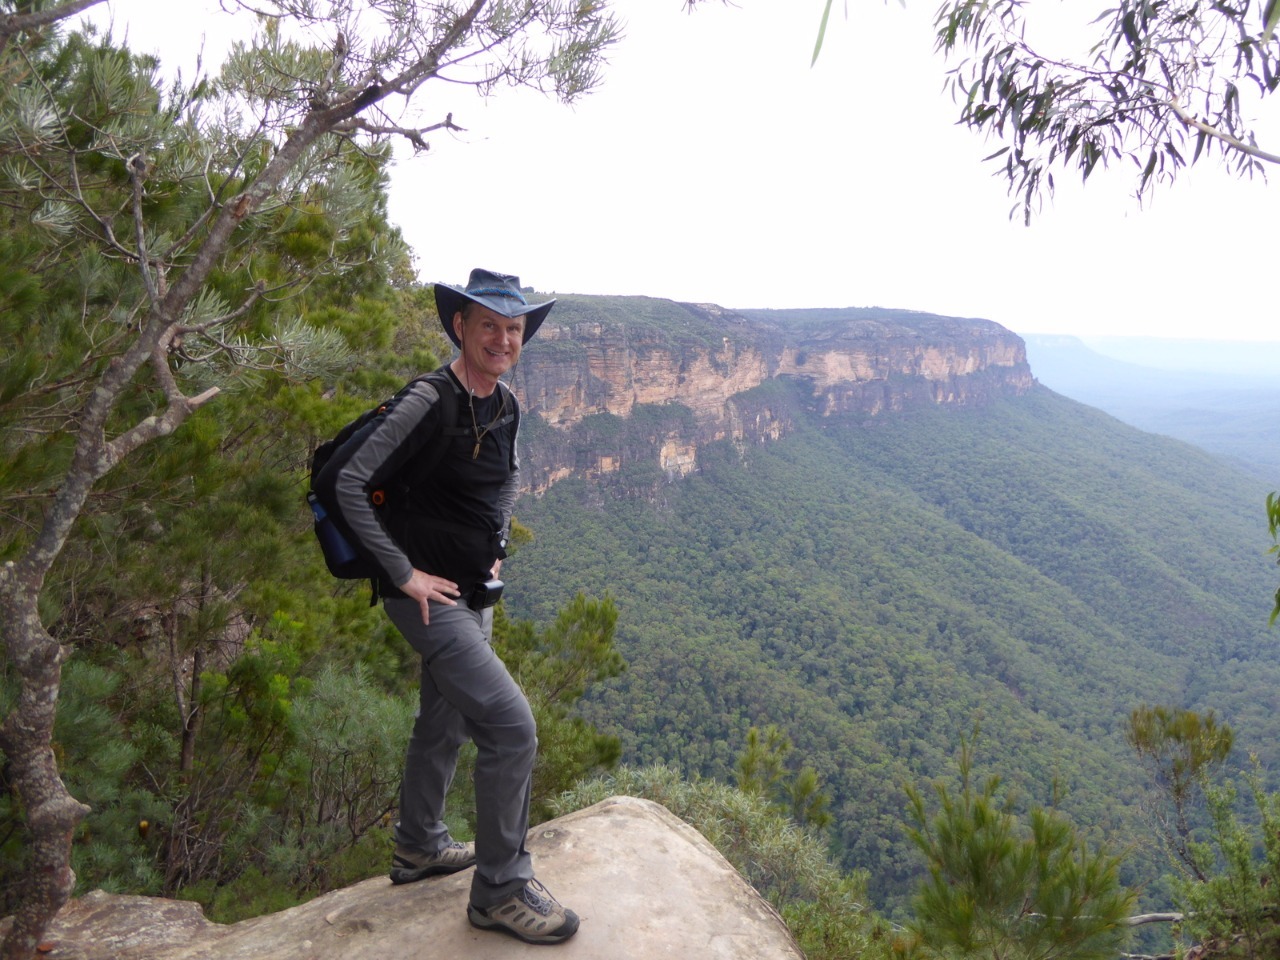 Yours truly on the Wentworth Falls trail